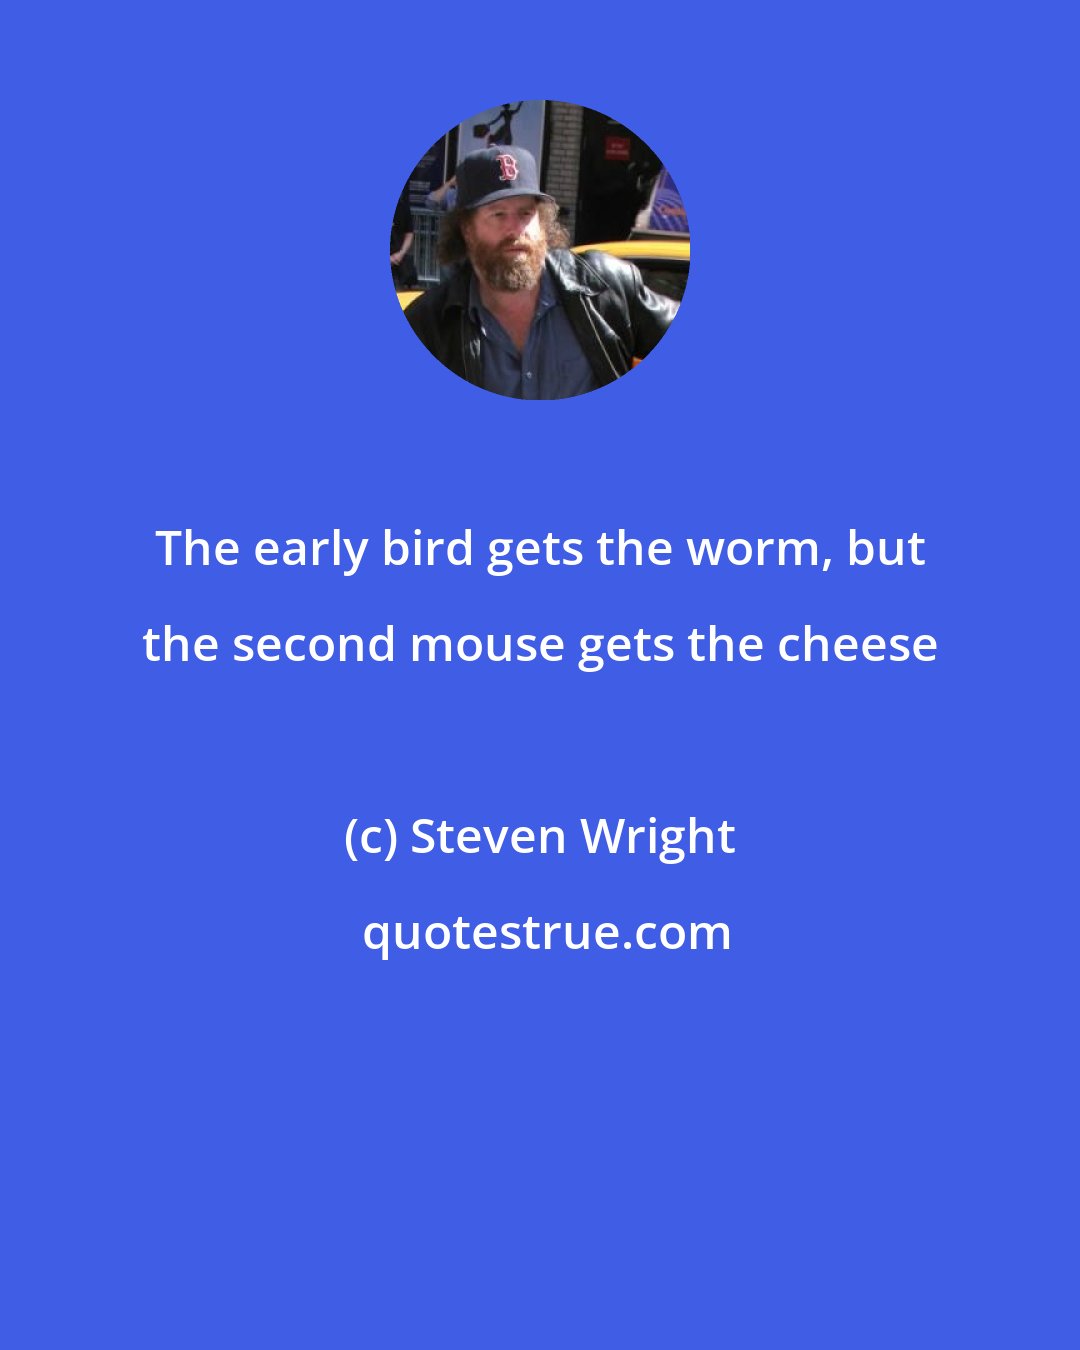 Steven Wright: The early bird gets the worm, but the second mouse gets the cheese